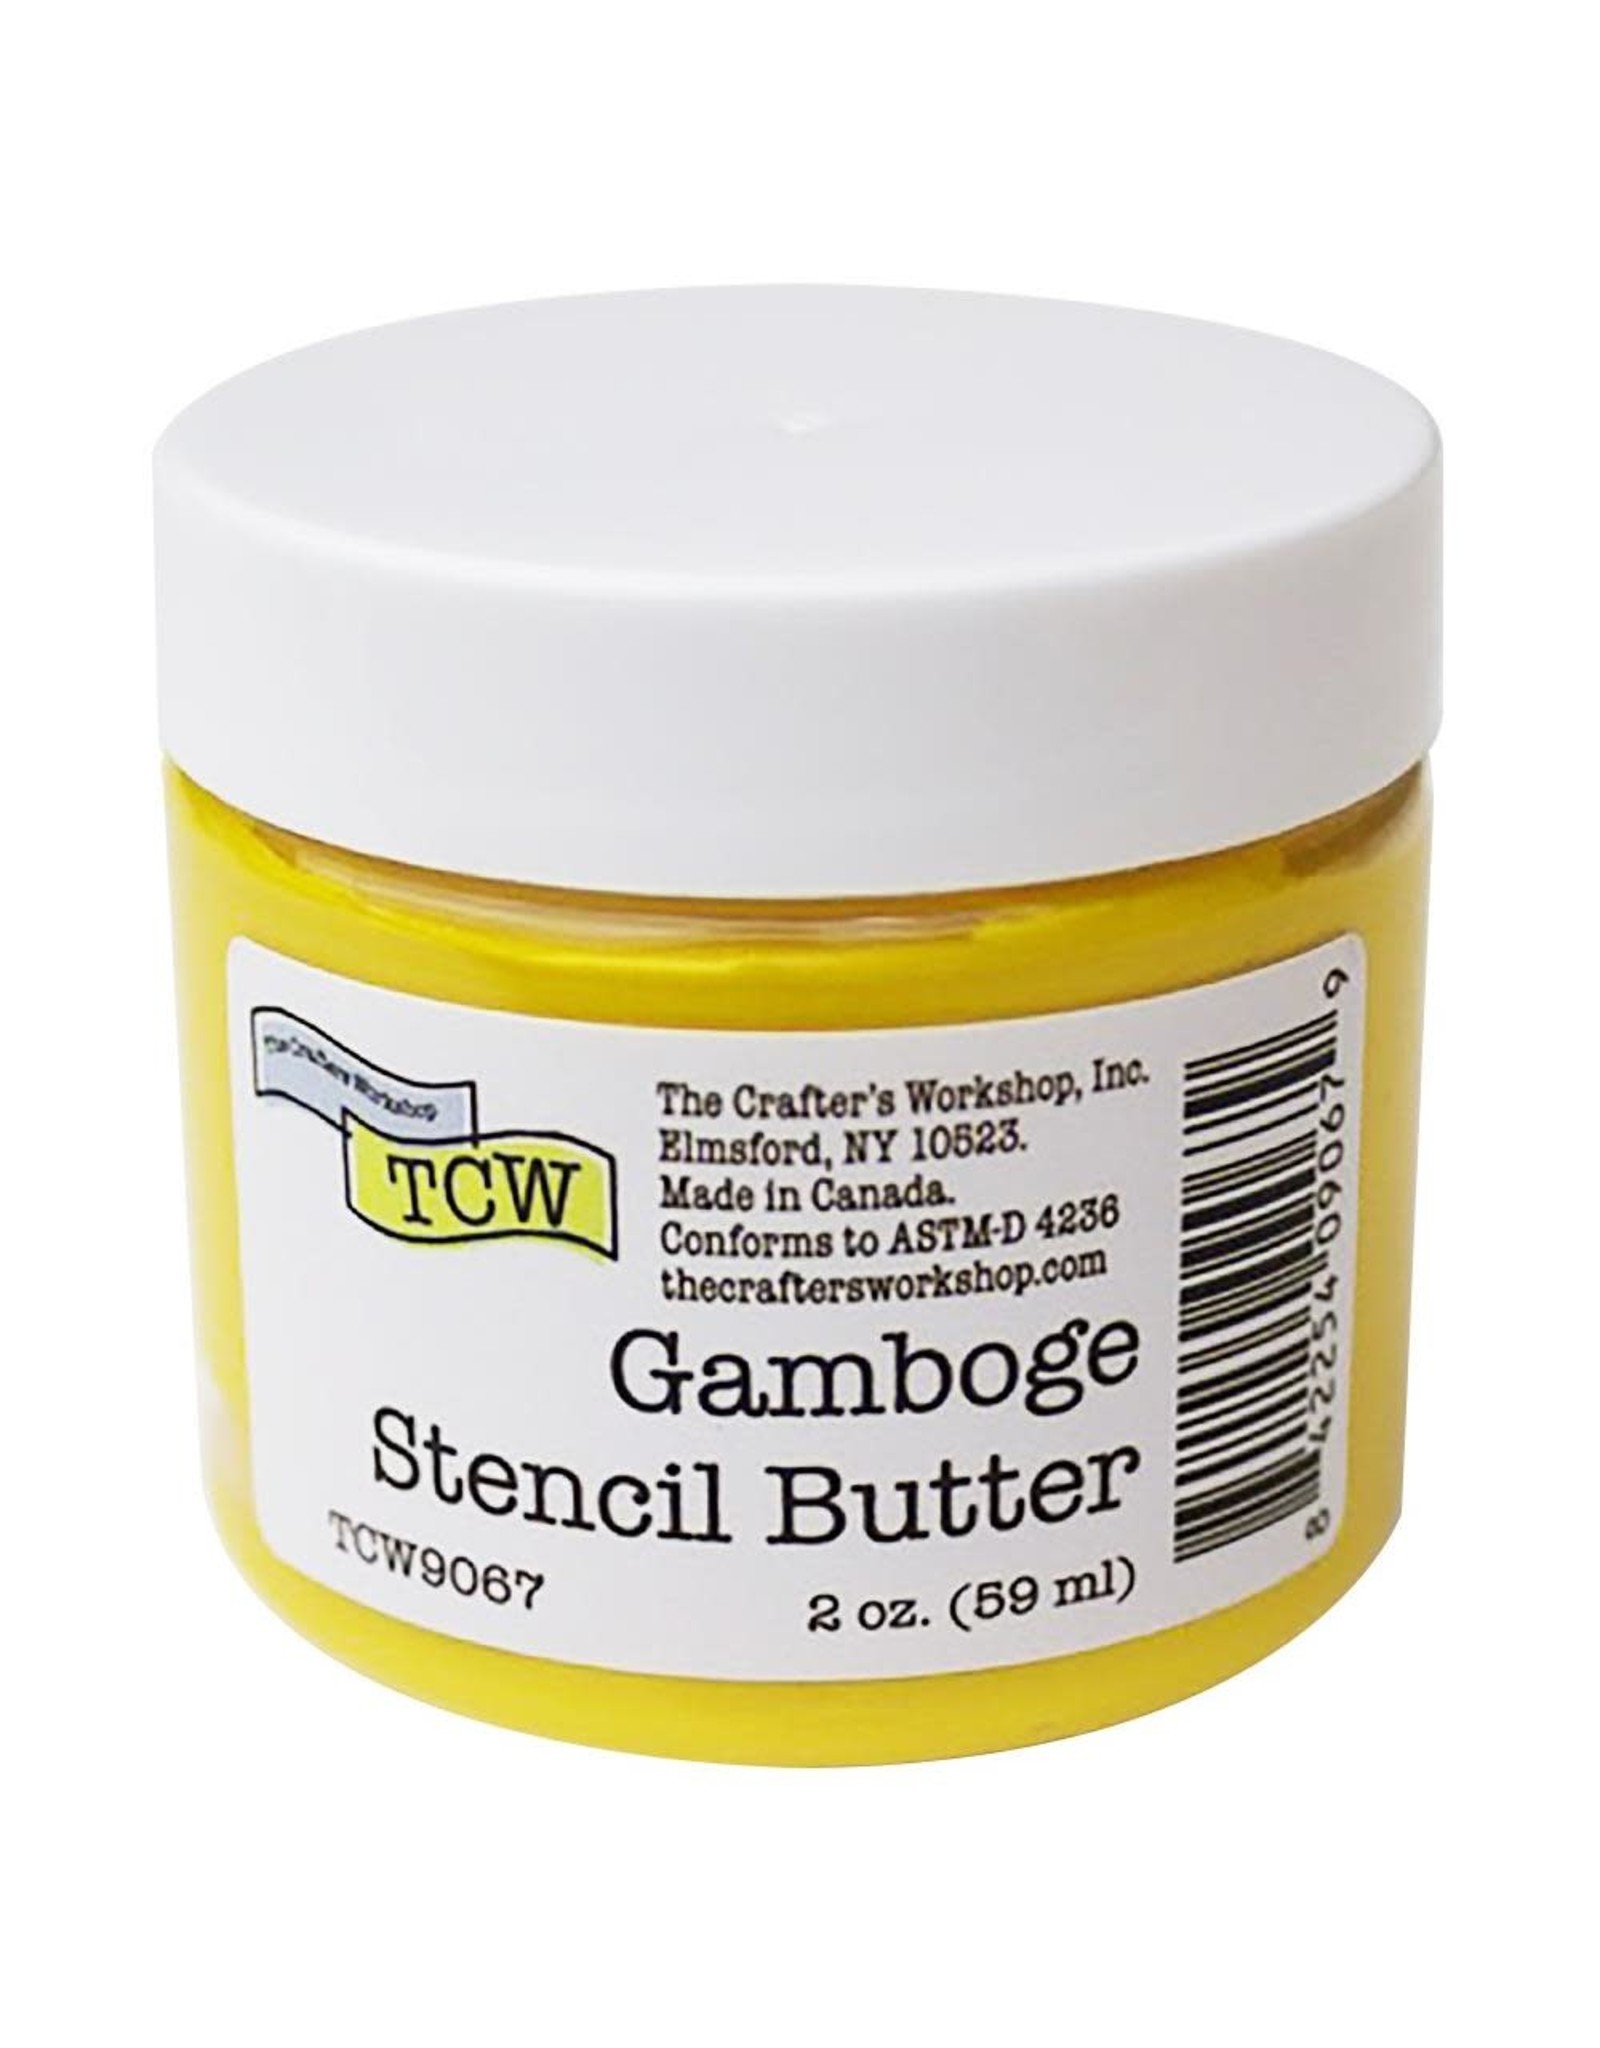 THE CRAFTERS WORKSHOP Stencil Butter 2 oz. - Gamboge